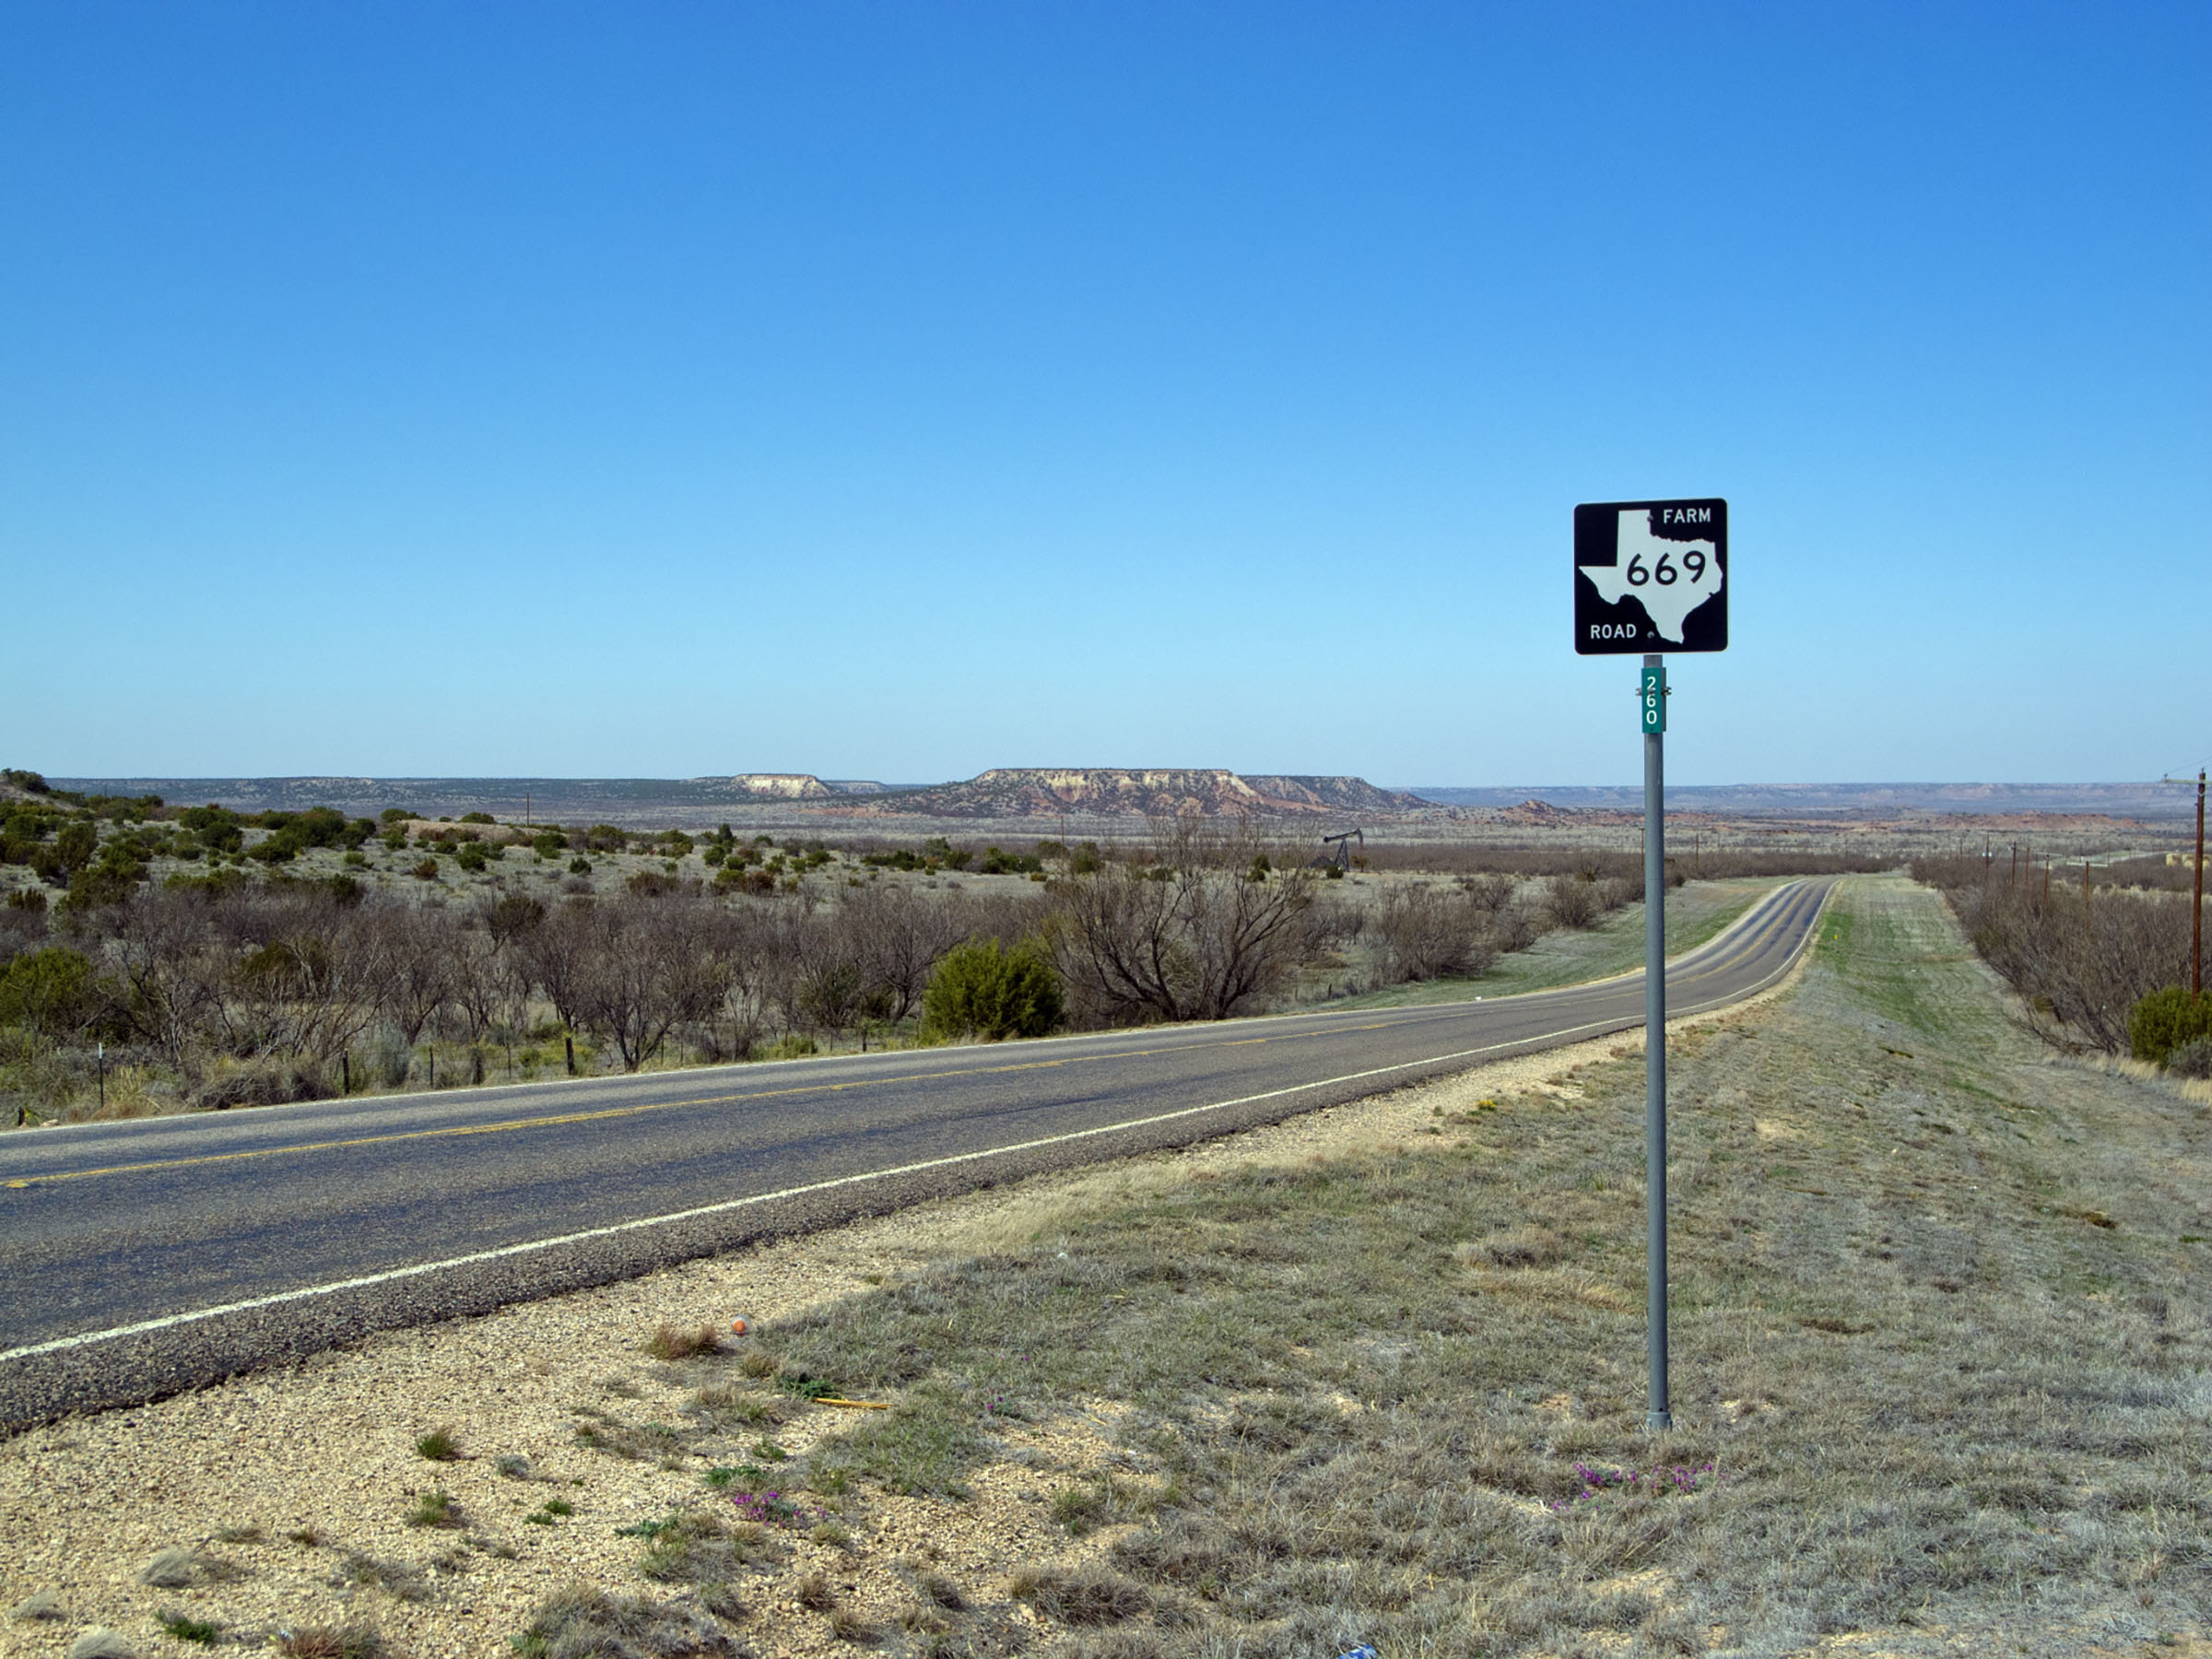 A highway sign post reading "Farm Road 669" stands in the foreground of a dry rural Texas scene along gray asphalt